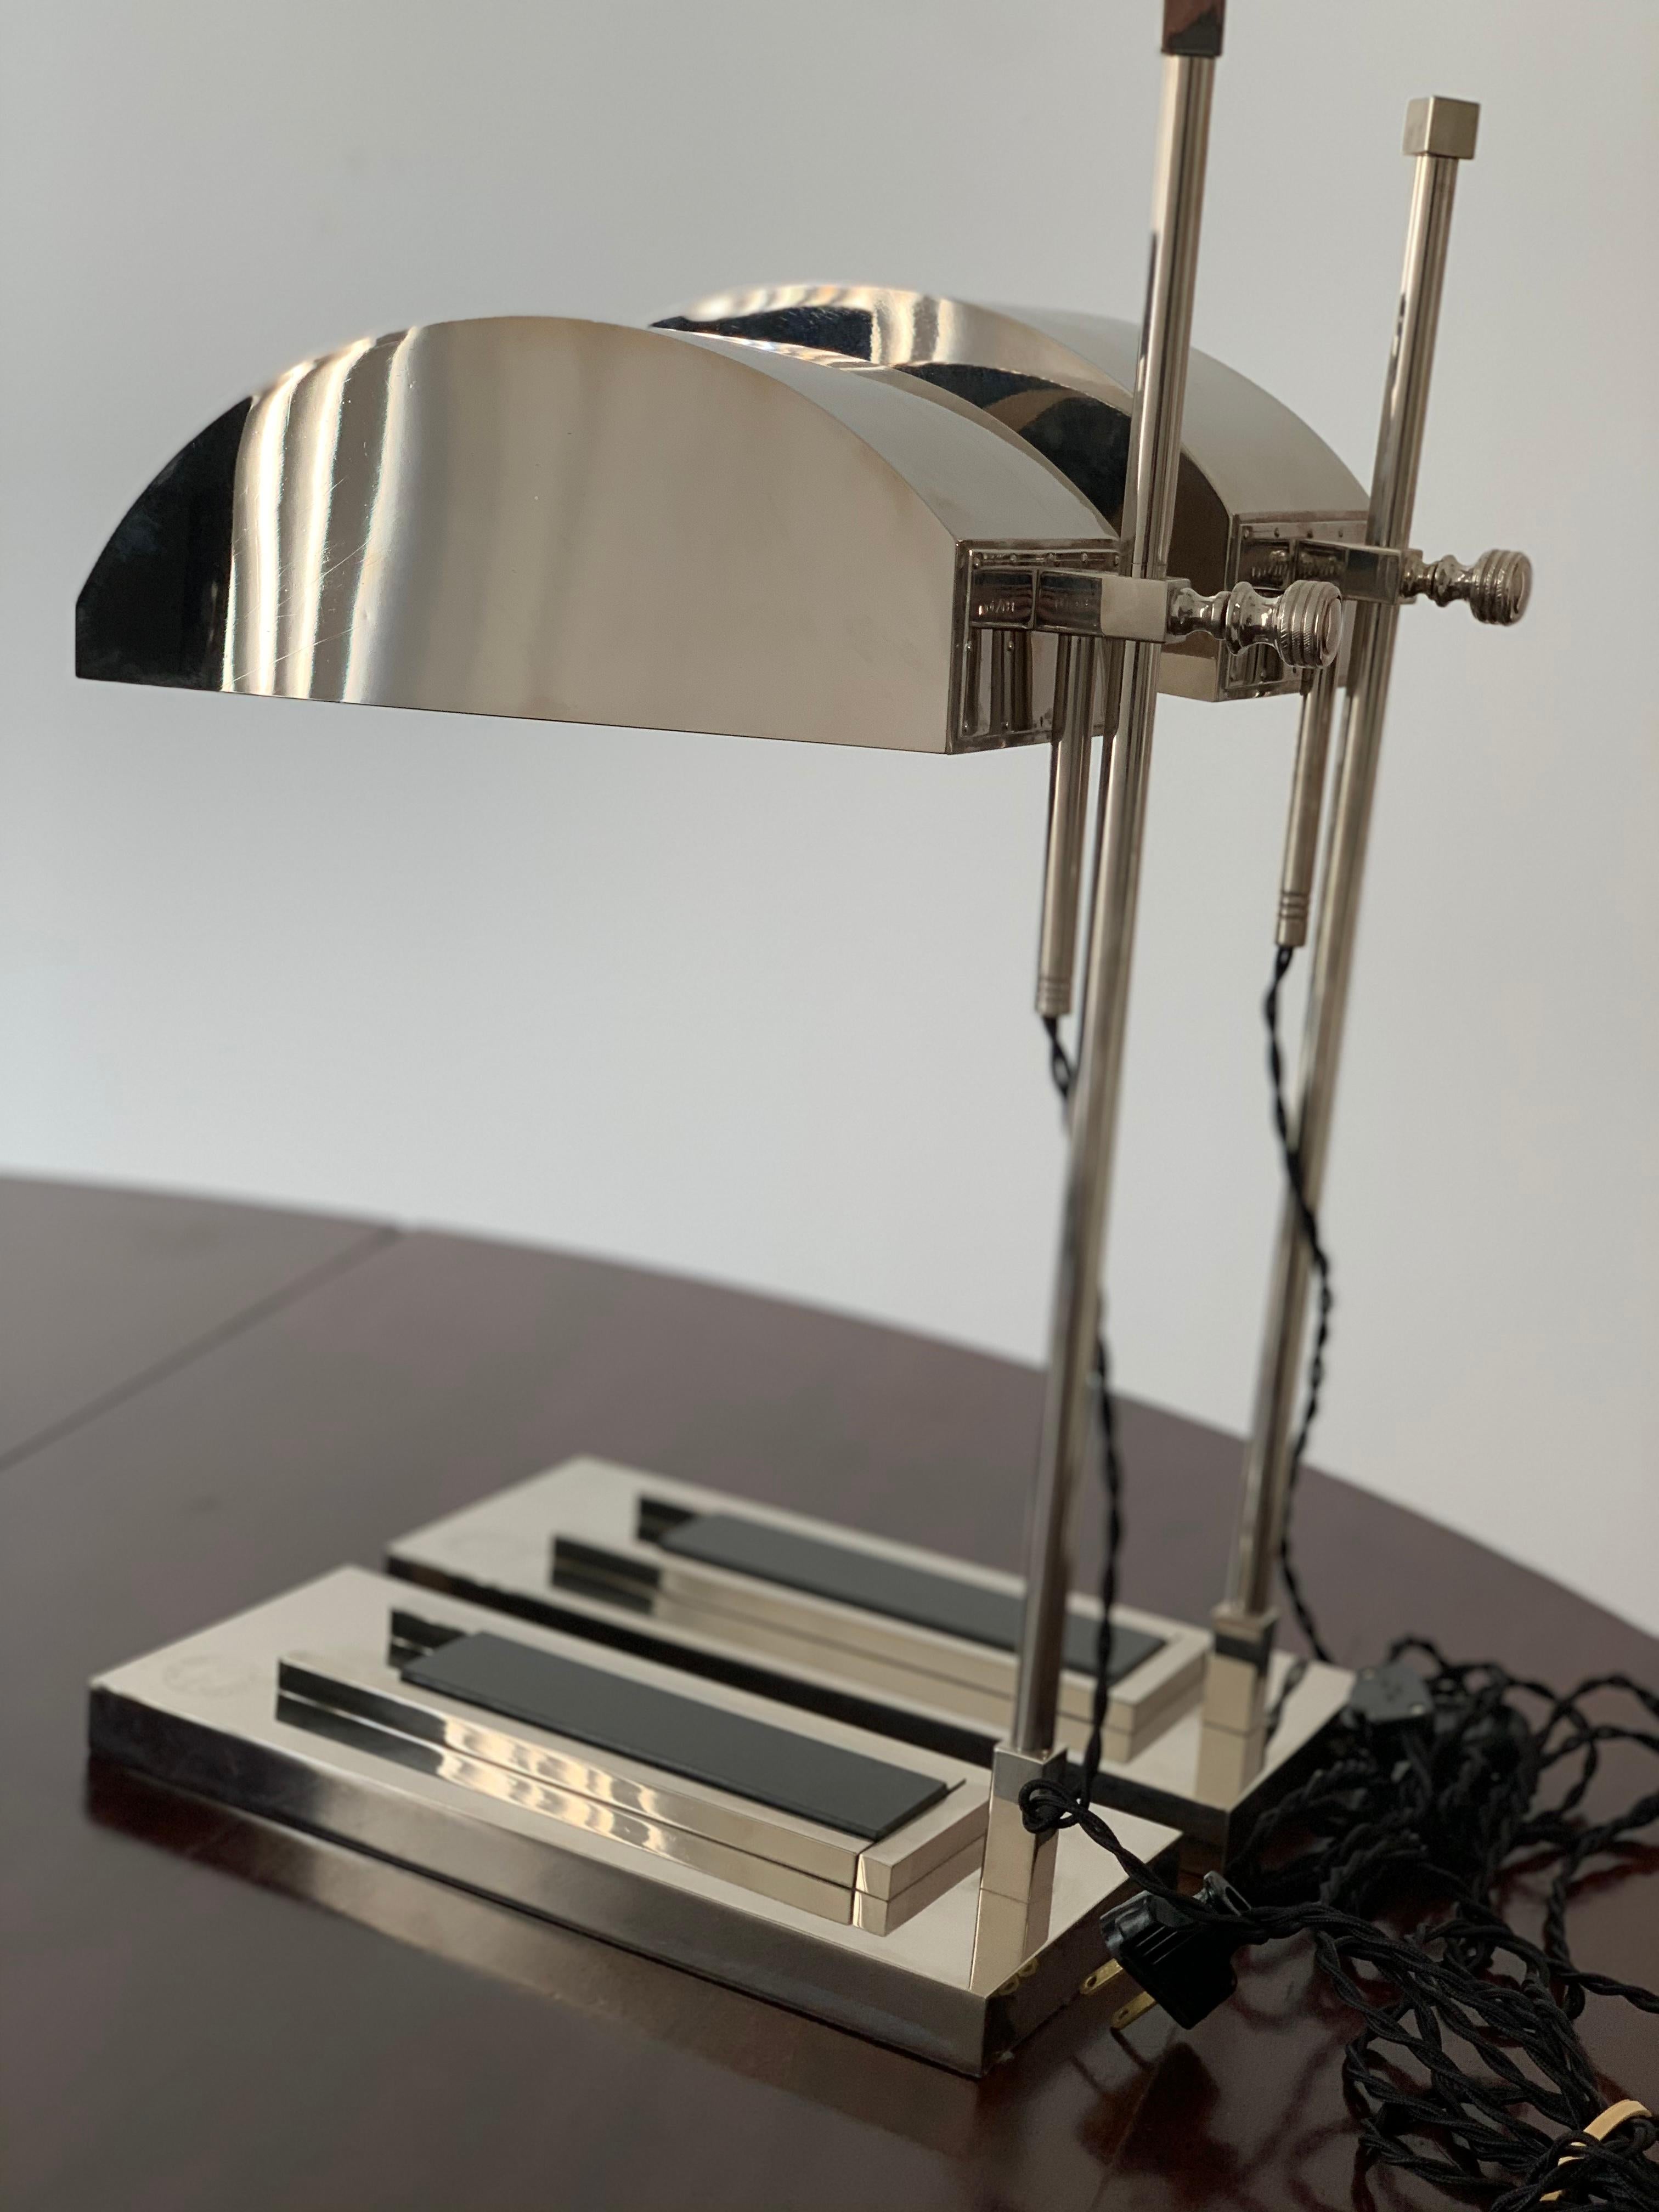 Authentic Marcel Breuer lamps, circa 1925

circa 1925 engraved 100/12 + 100/31

Designed for the international exposition of modern industrial decorative arts, Paris. Composed of brass plated nickel and stamped “Exposition Paris 1925”

Two